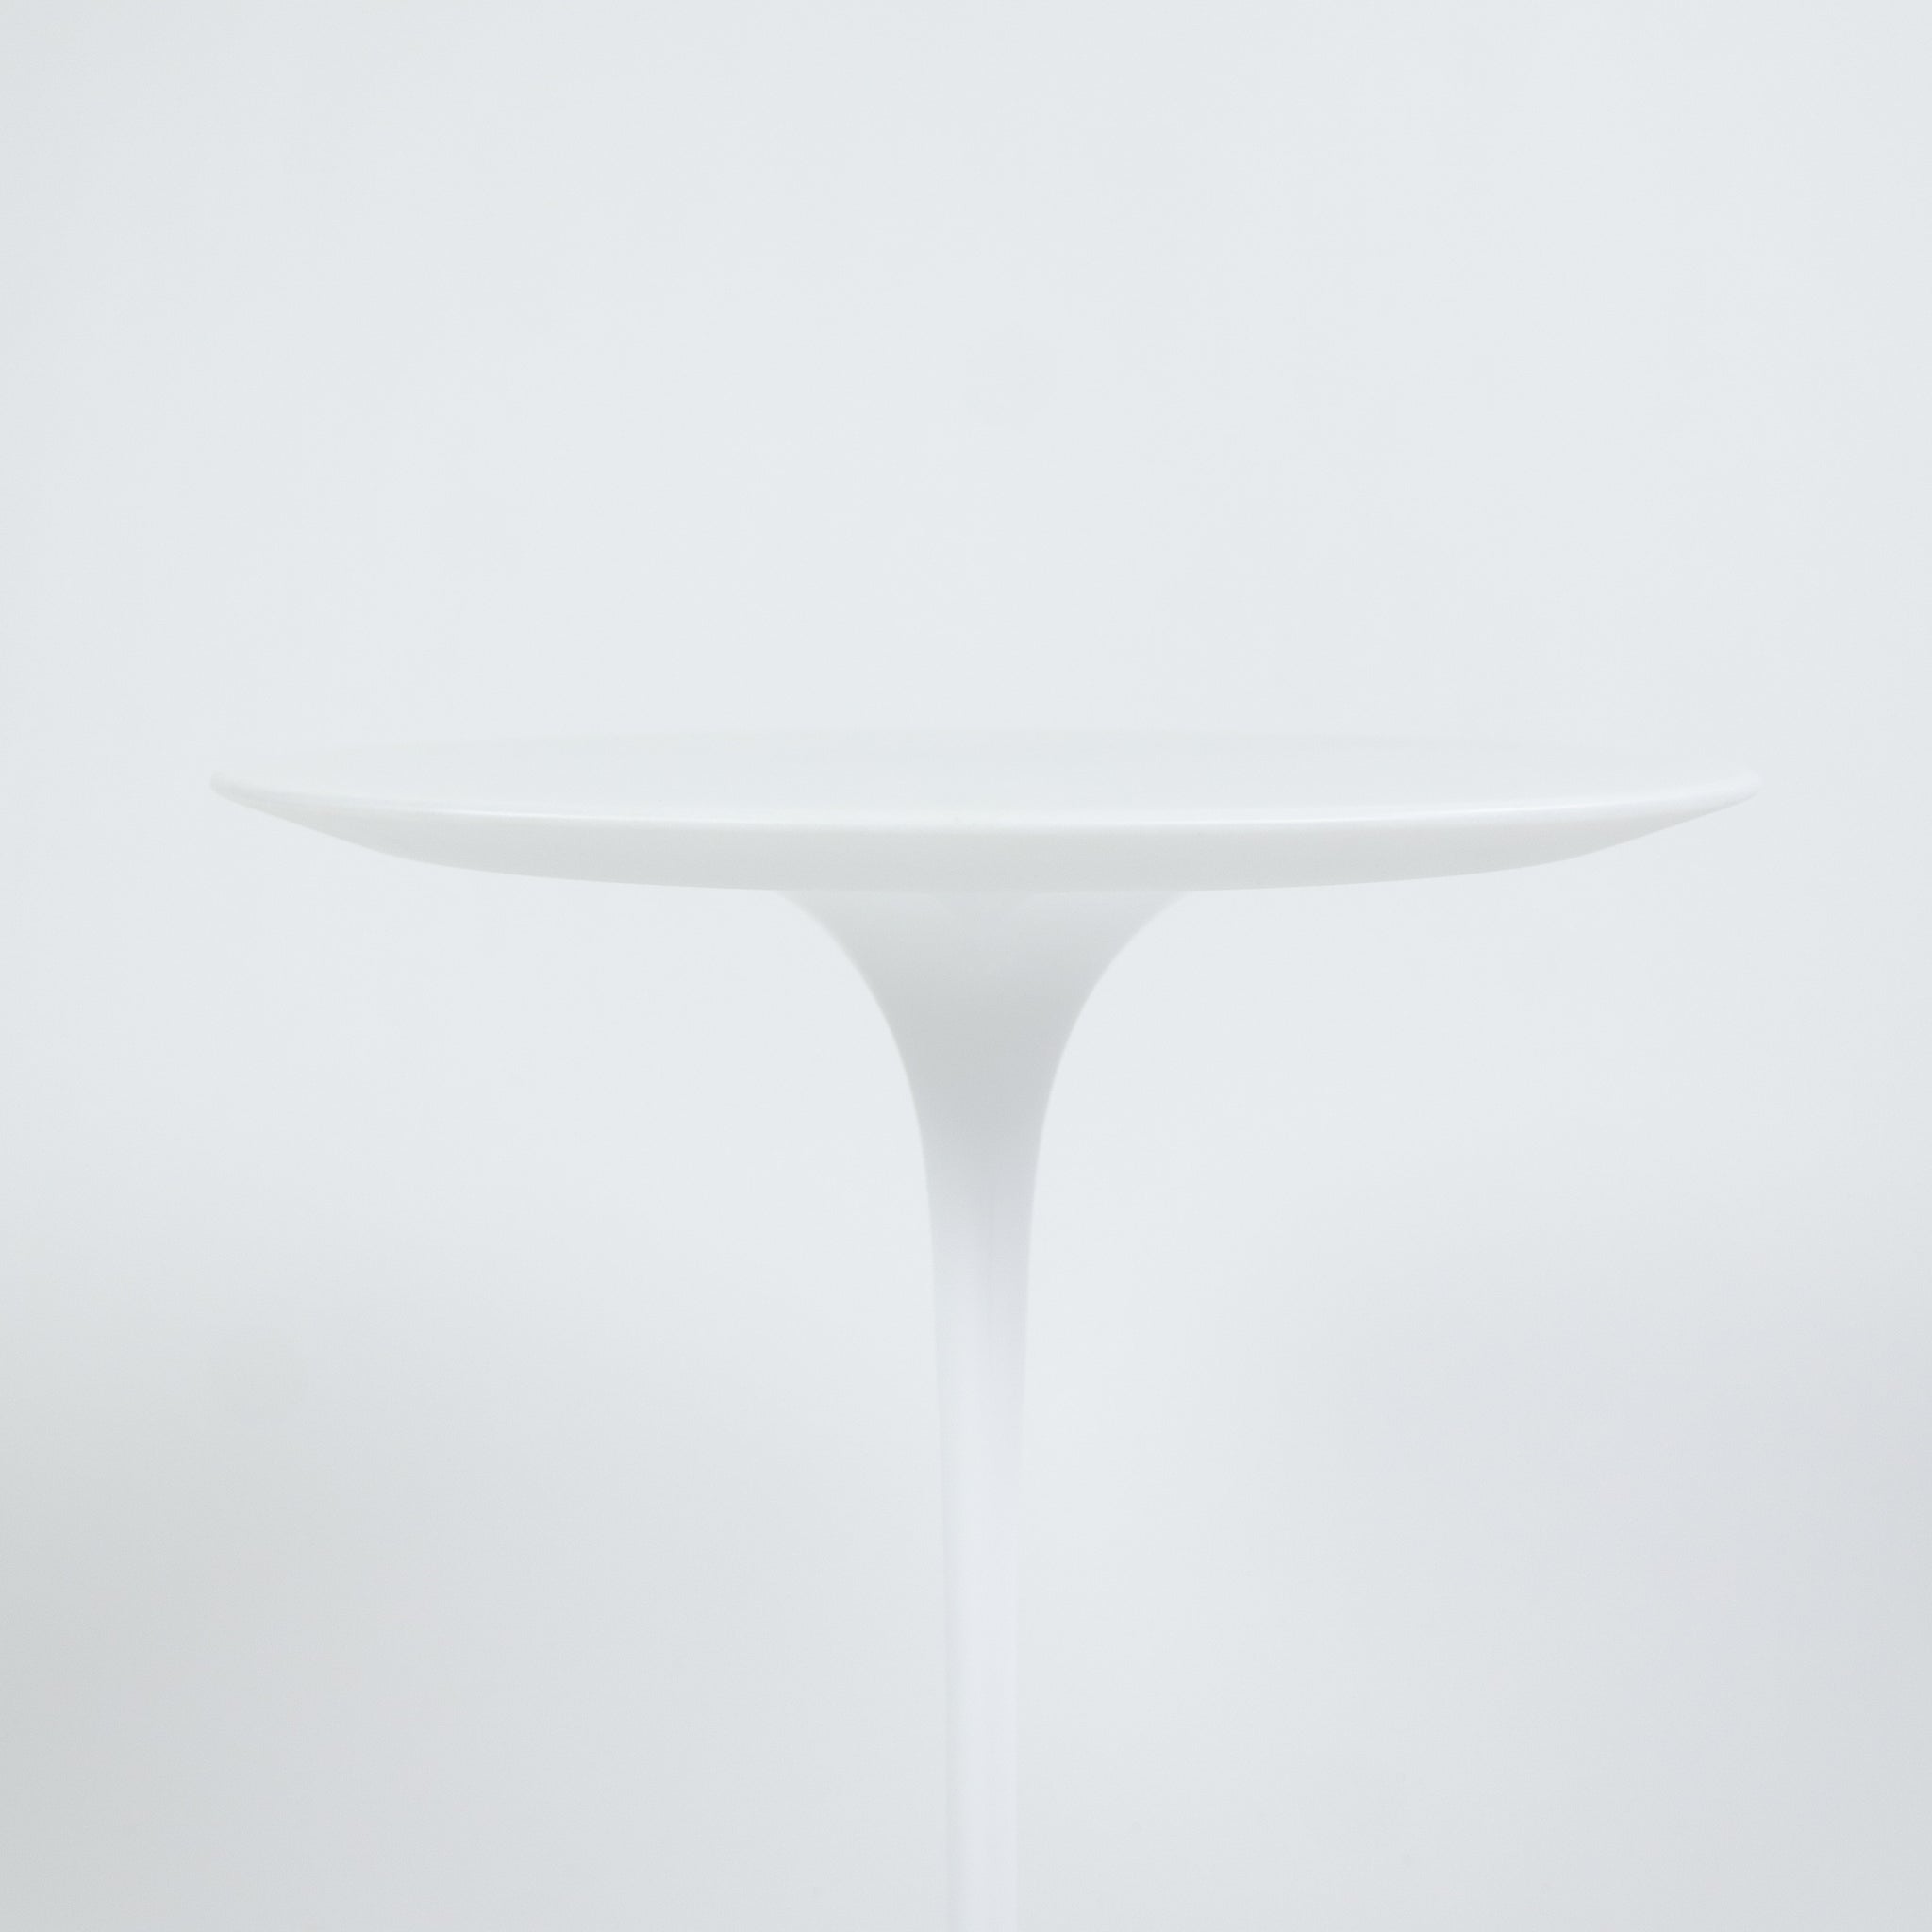 SOLD New Eero Saarinen For Knoll 16 Inch Tulip Side Table Matte White Marble Top 2x